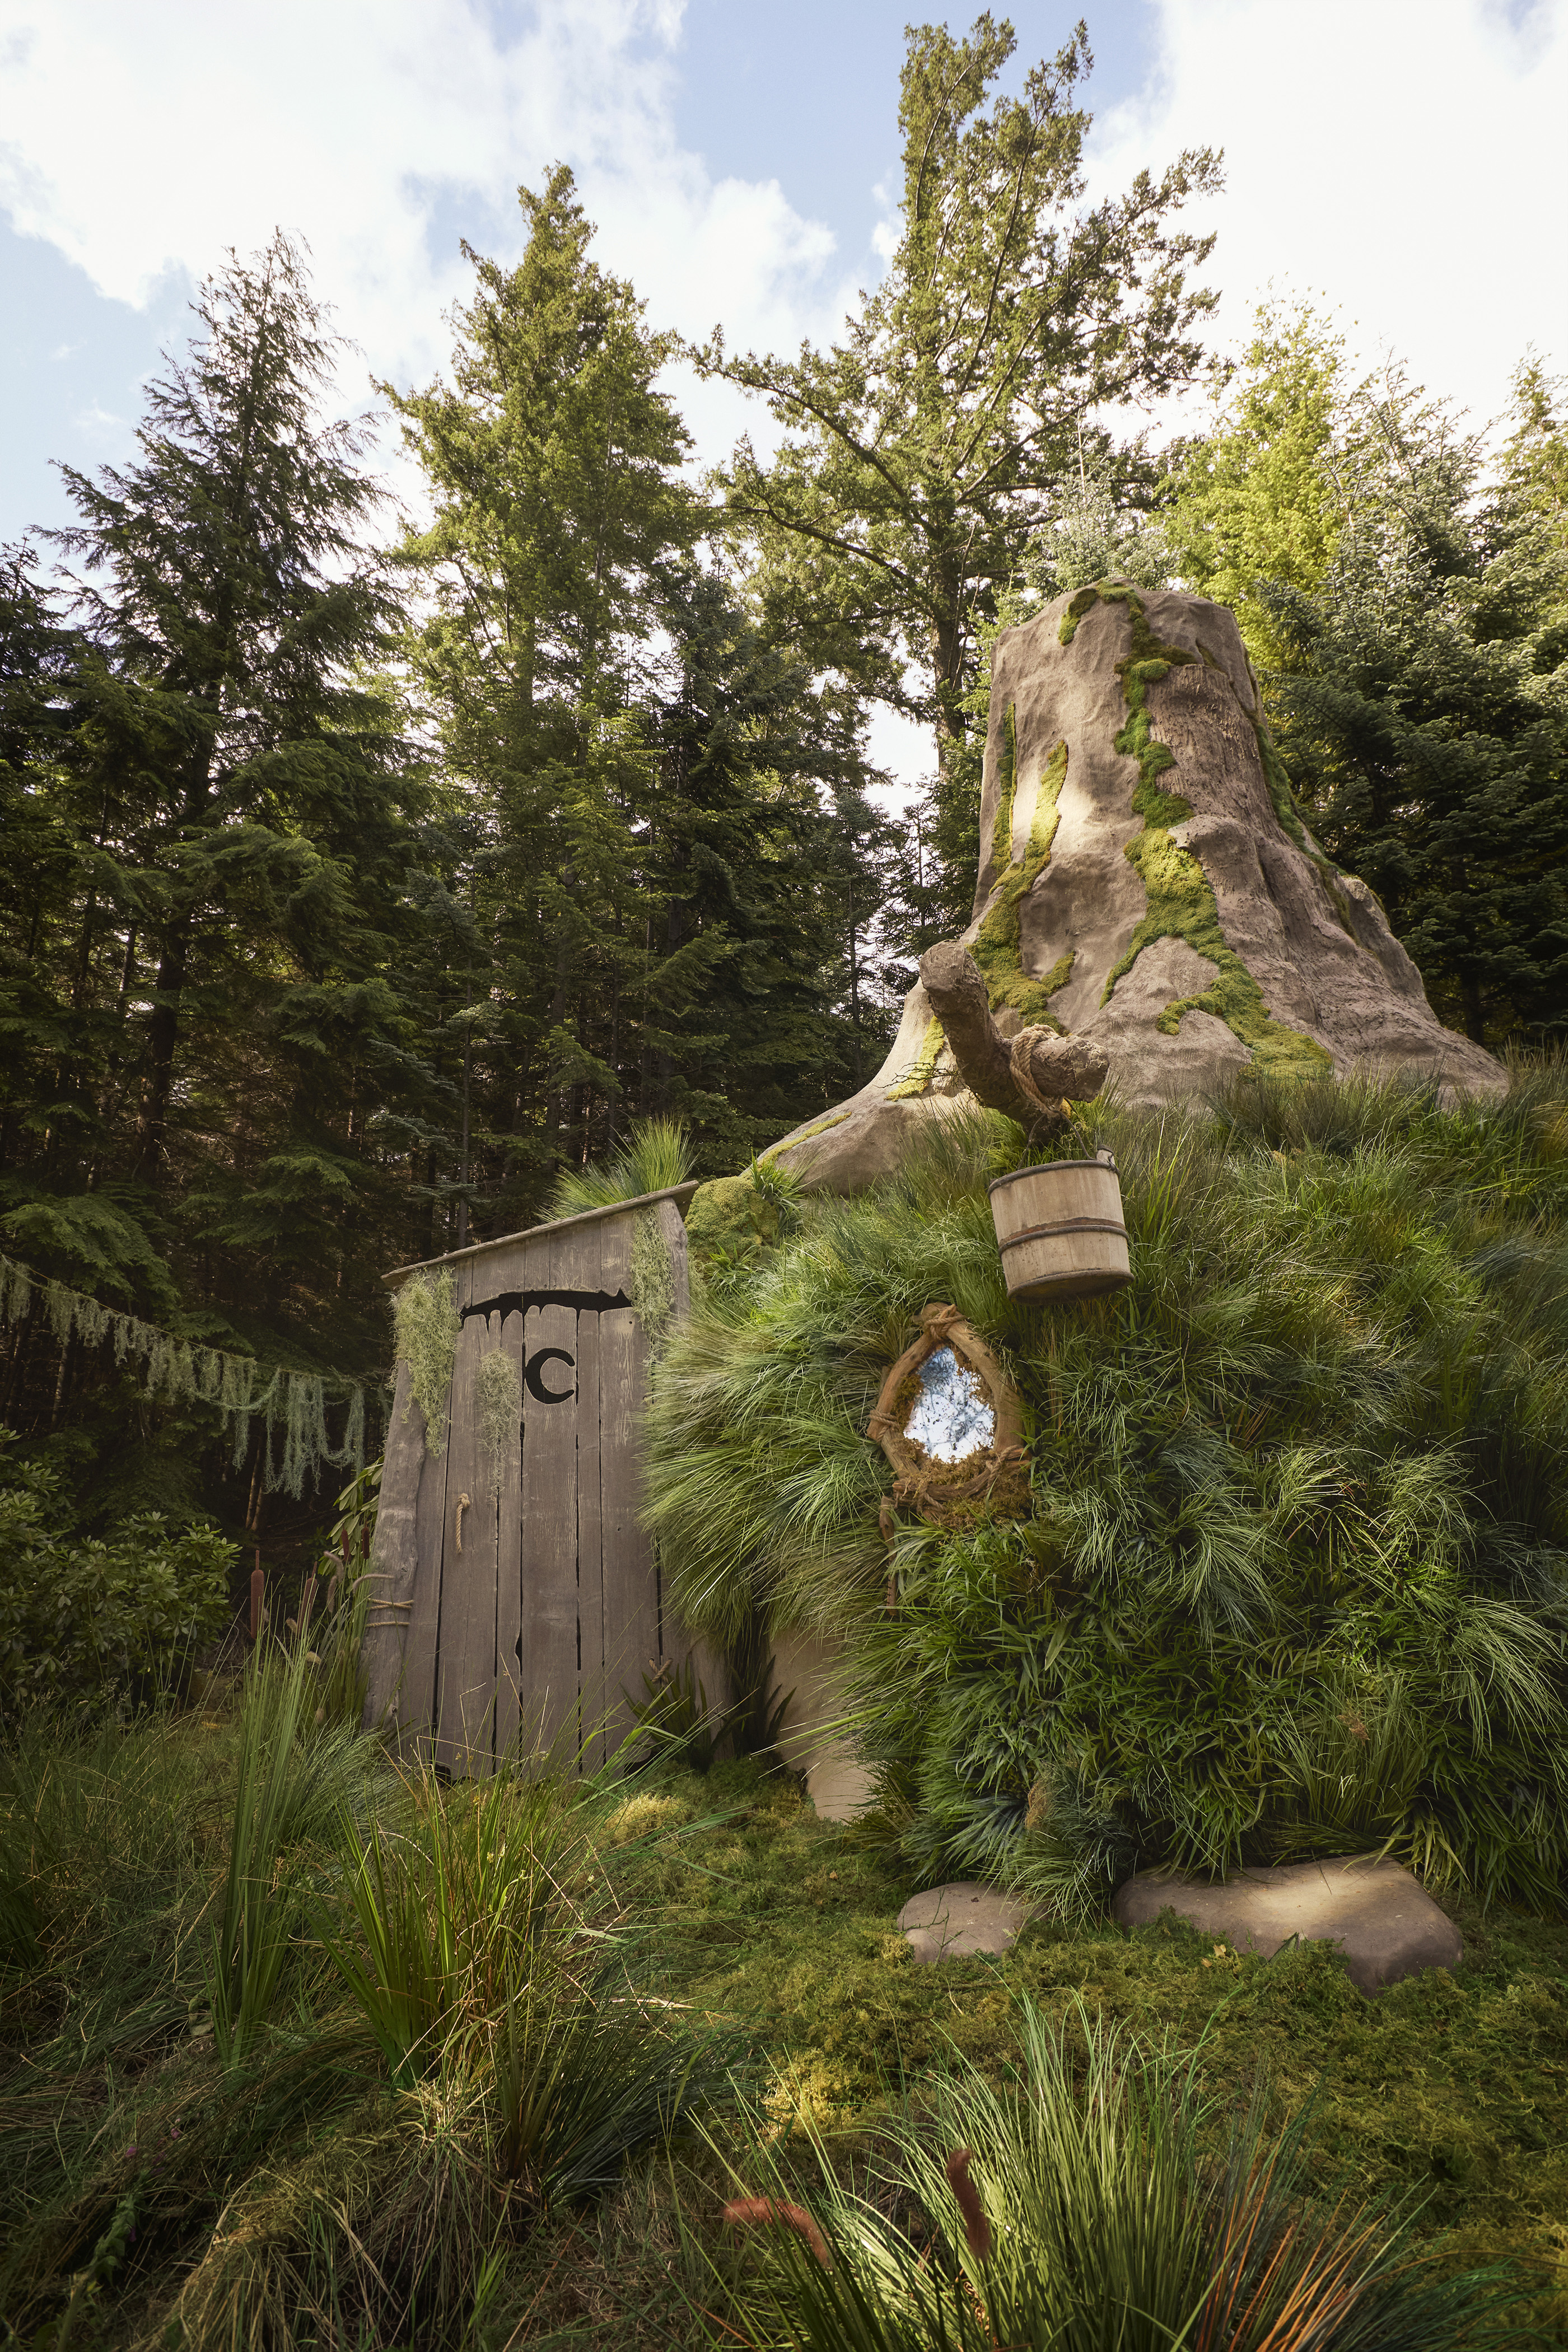 Exterior view of Shrek's Swamp showing the outhouse adjoining the stump